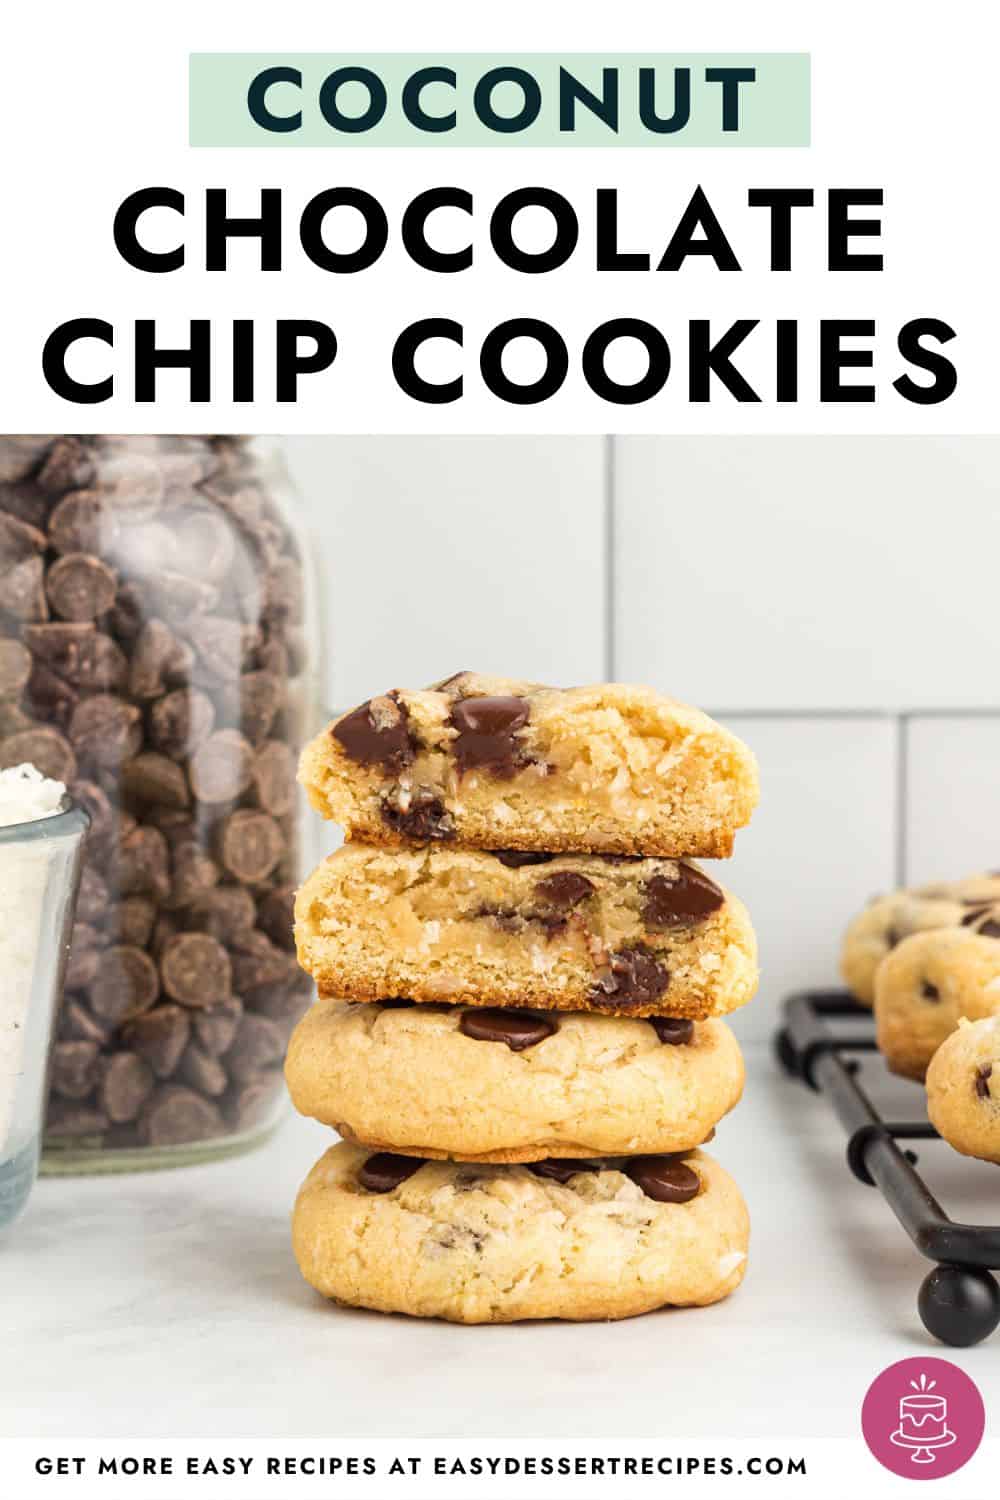 Coconut chocolate chip cookies stacked on top of each other.